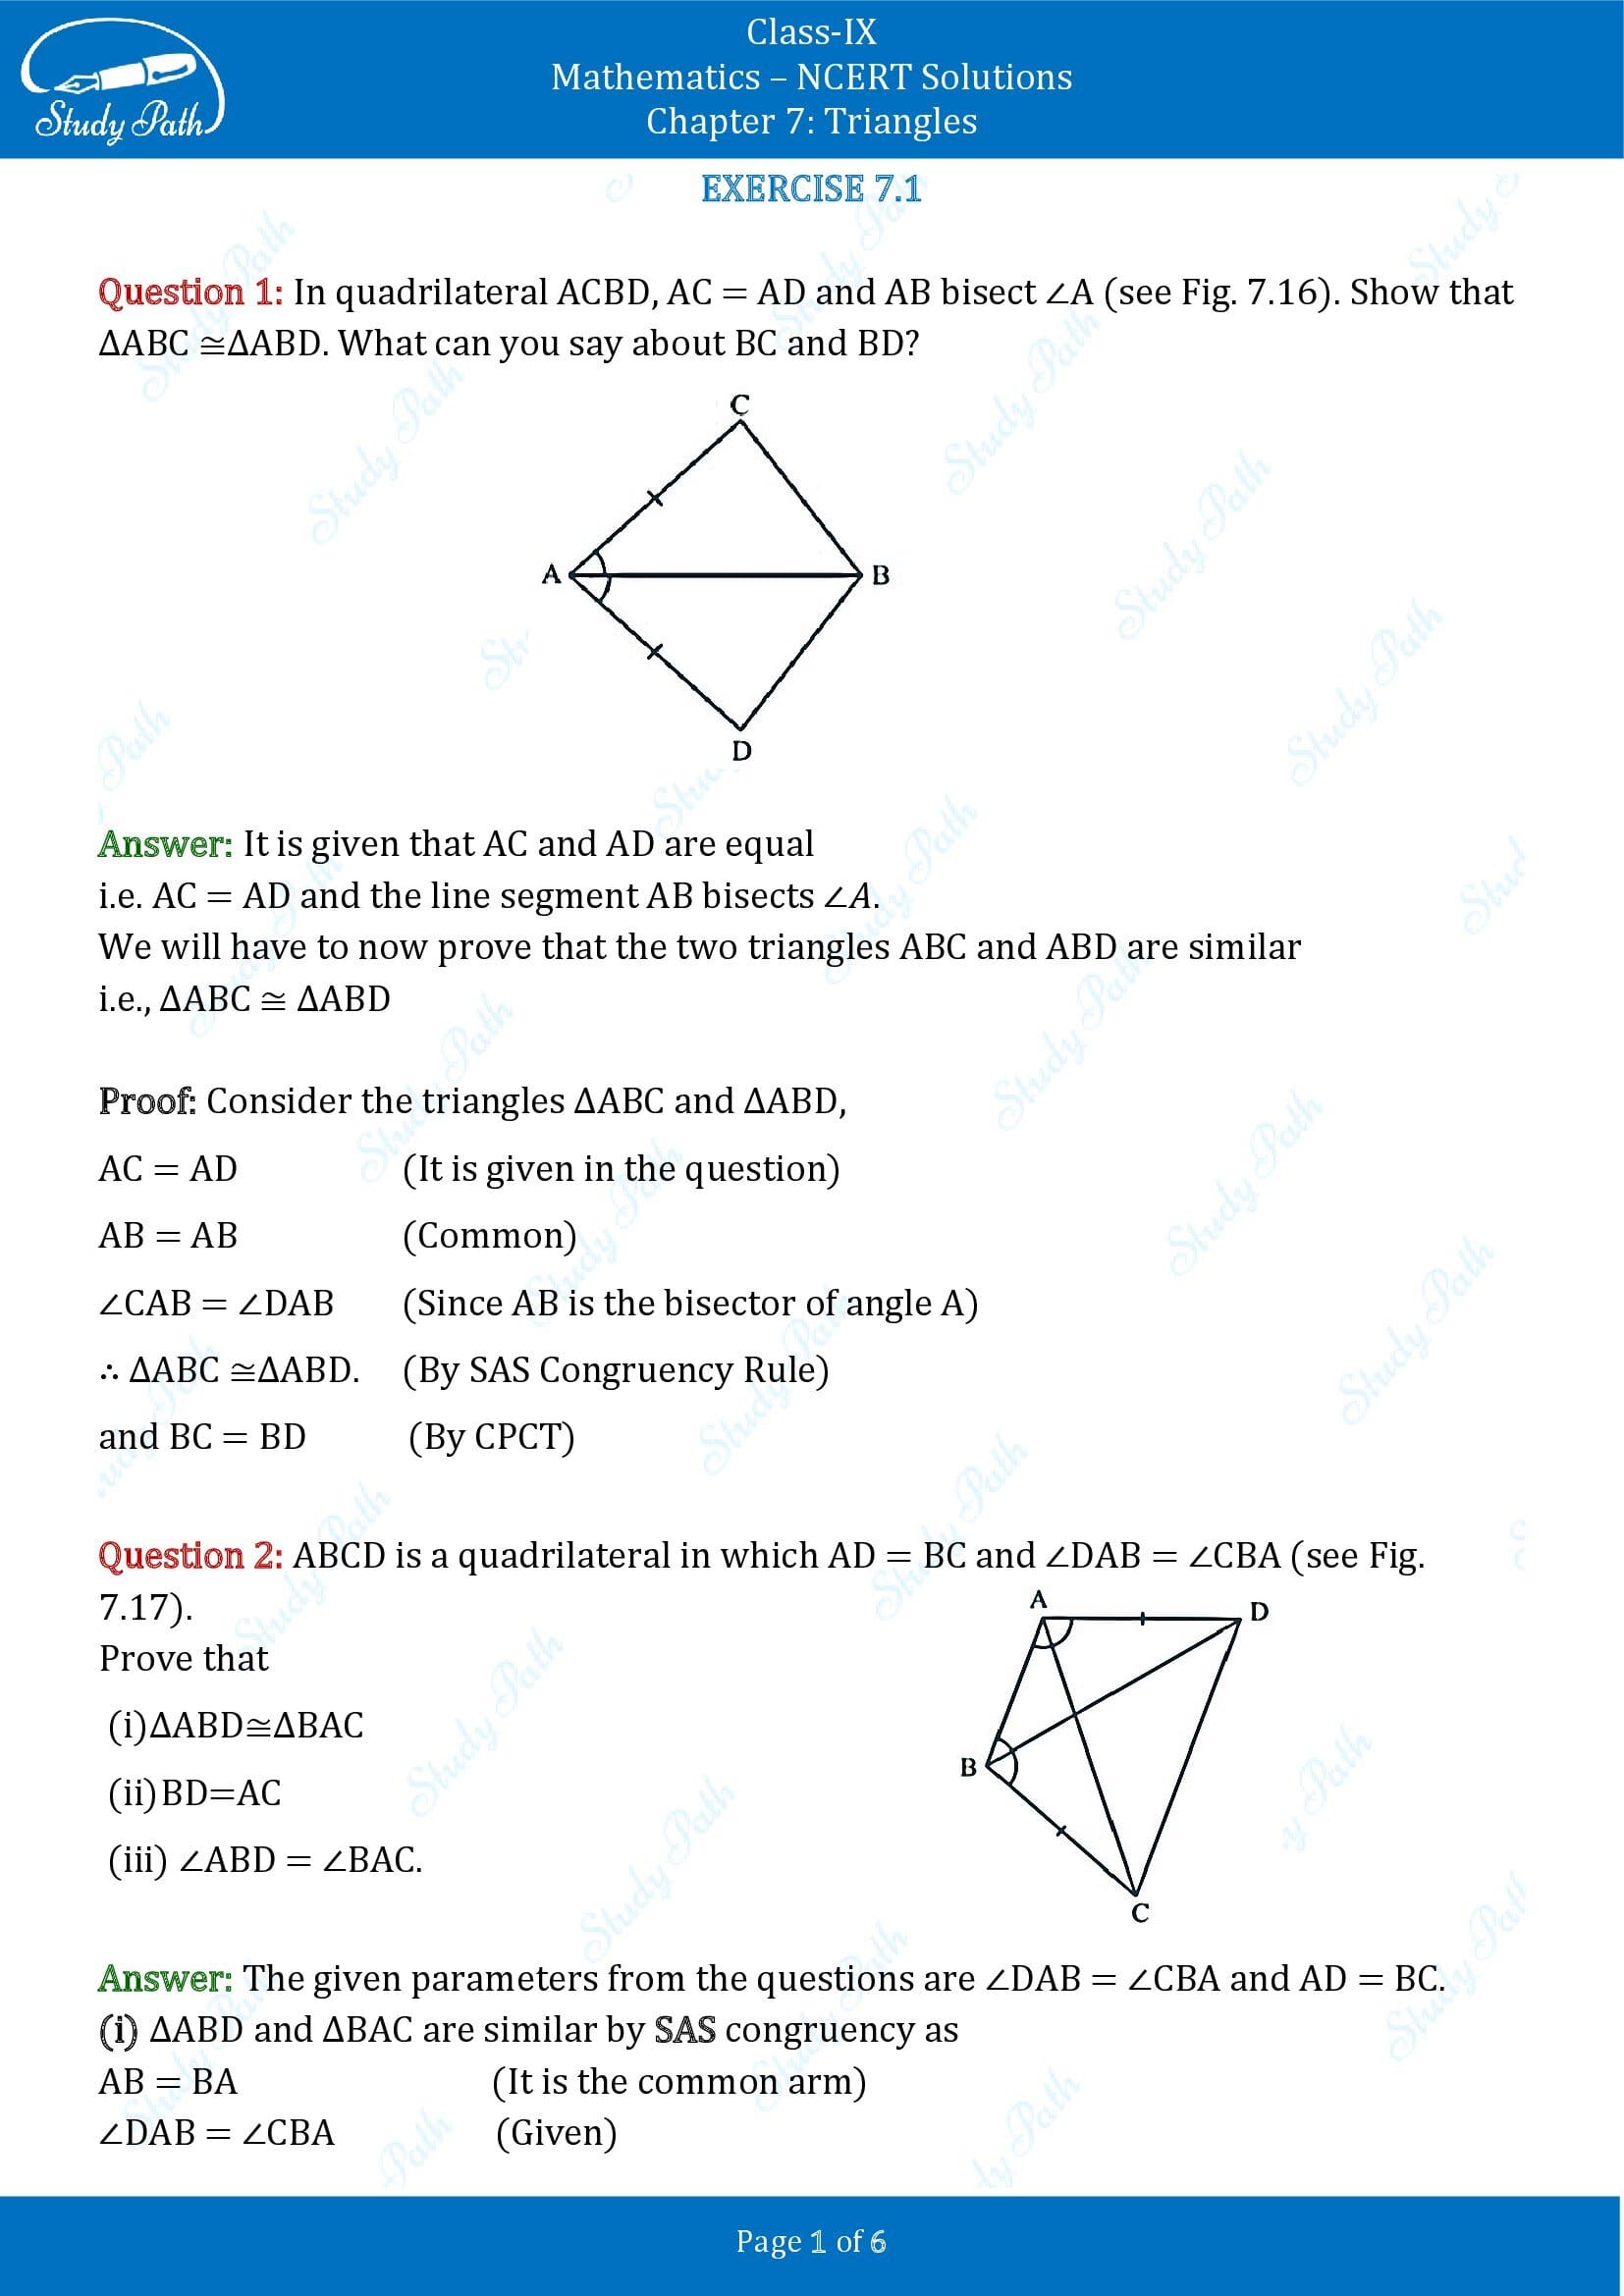 NCERT Solutions for Class 9 Maths Chapter 7 Triangles Exercise 7.1 00001